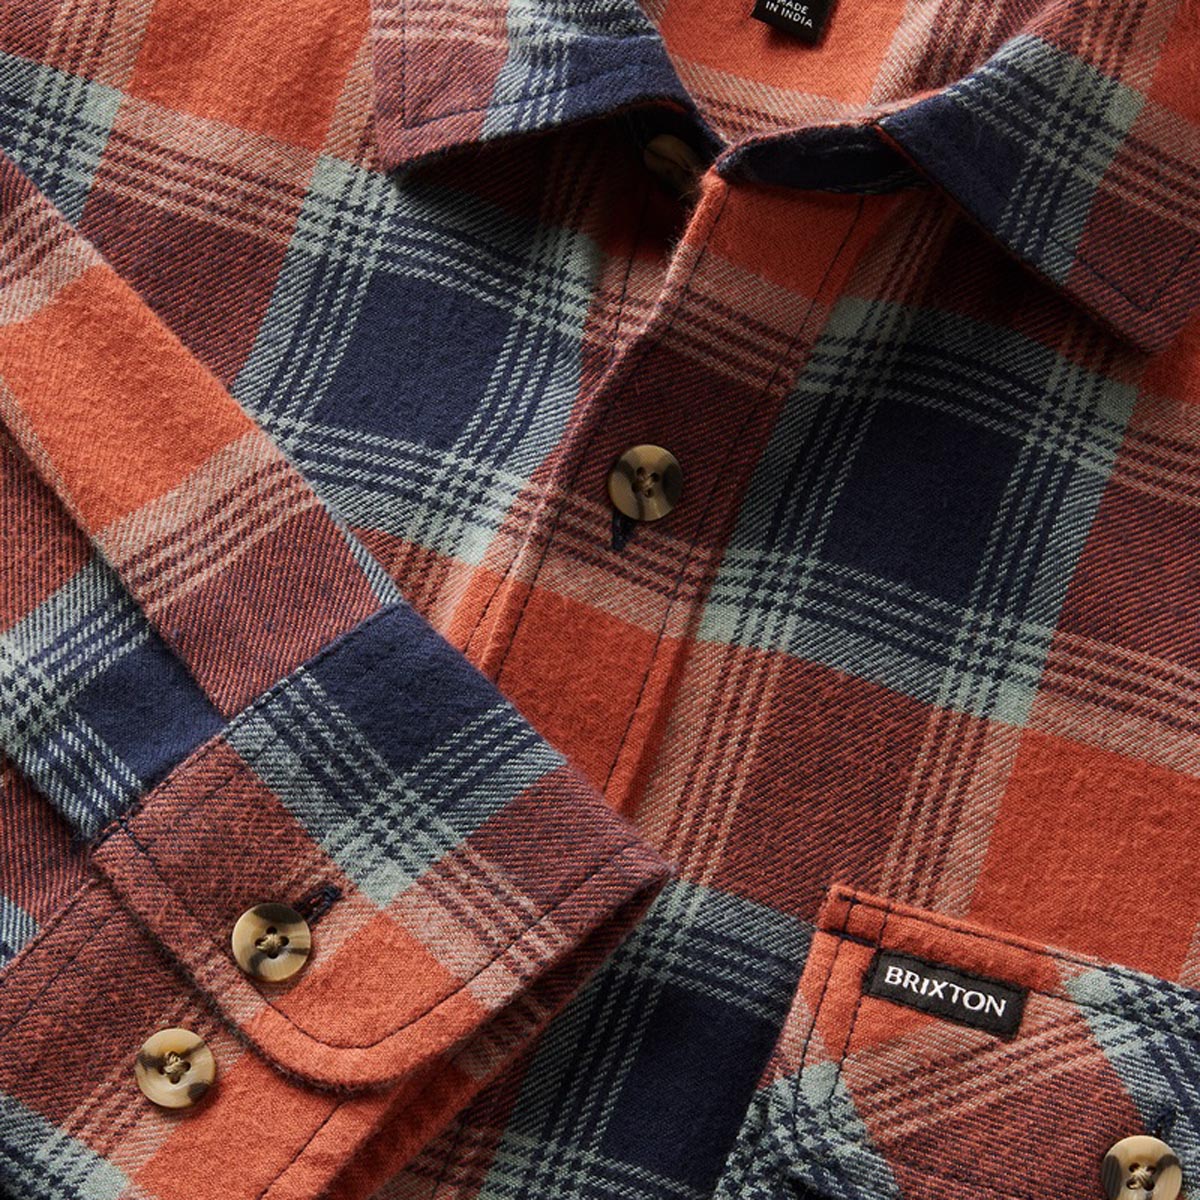 Brixton Bowery Lw Ultra Flannel Shirt - Terracotta/Chinois Green image 3